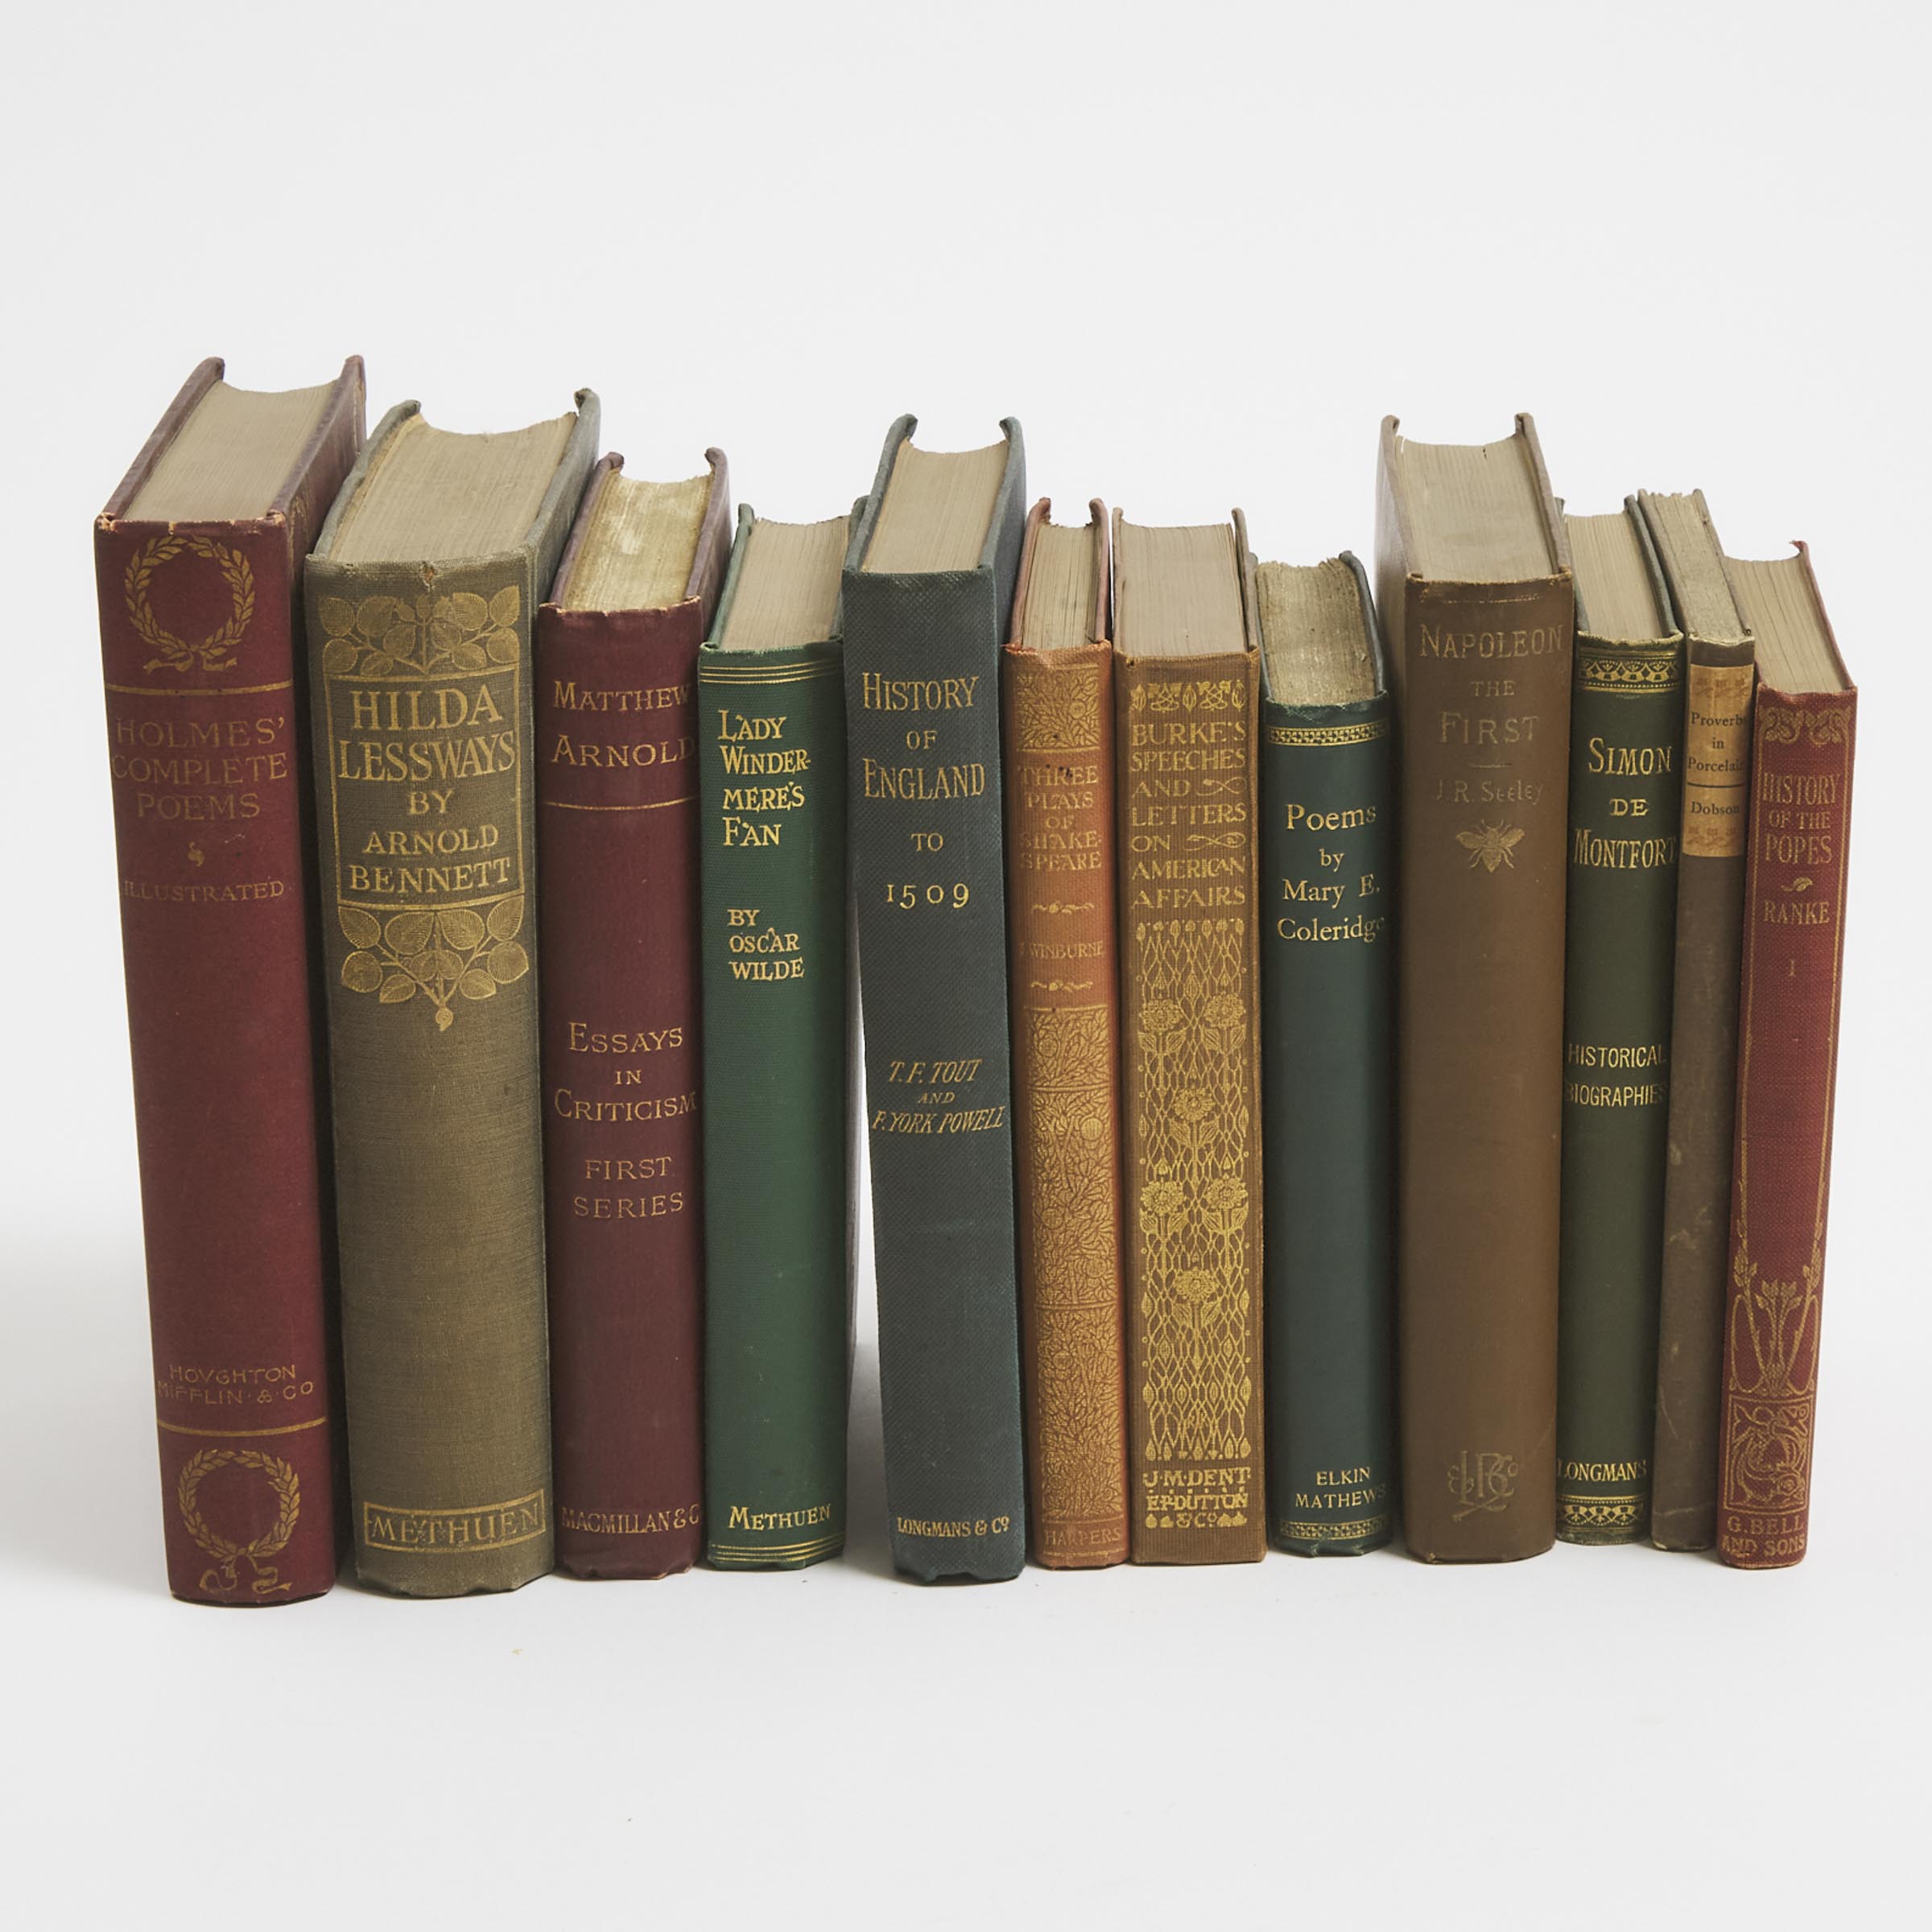 12 Volumes from the Library of Vincent Massey and Alice Parkin Massey, 19th/early 20th centuries